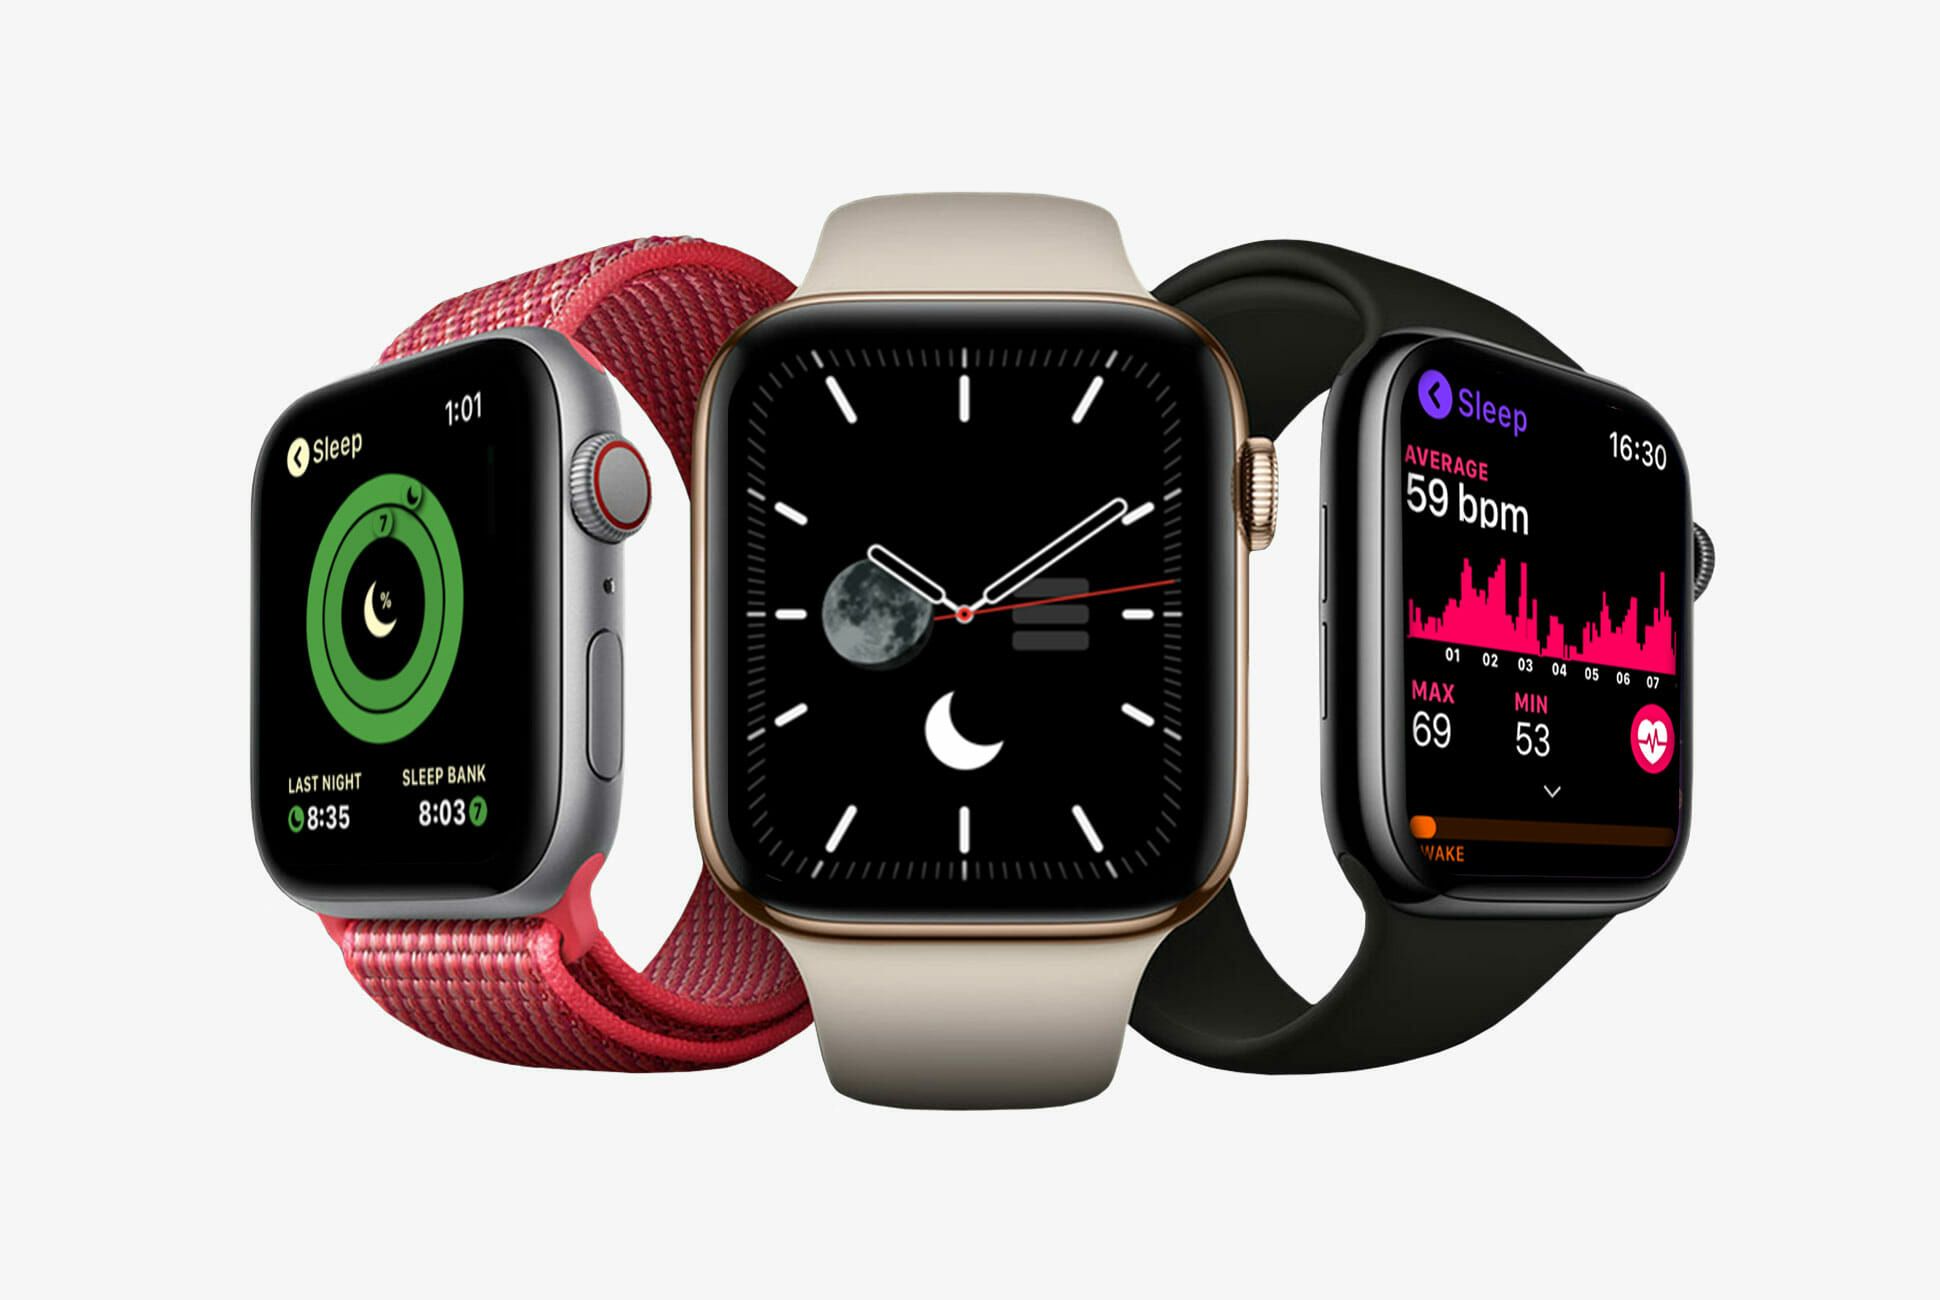 26 Best Pictures Apple Watch Apps Free 2019 - Best Apple Watch Apps For Passwords And Making Life Easier The Best Apple Watch Apps We Ve Used In 20 In 2020 Best Apple Watch Apple Watch Apps Best Apple Watch Apps